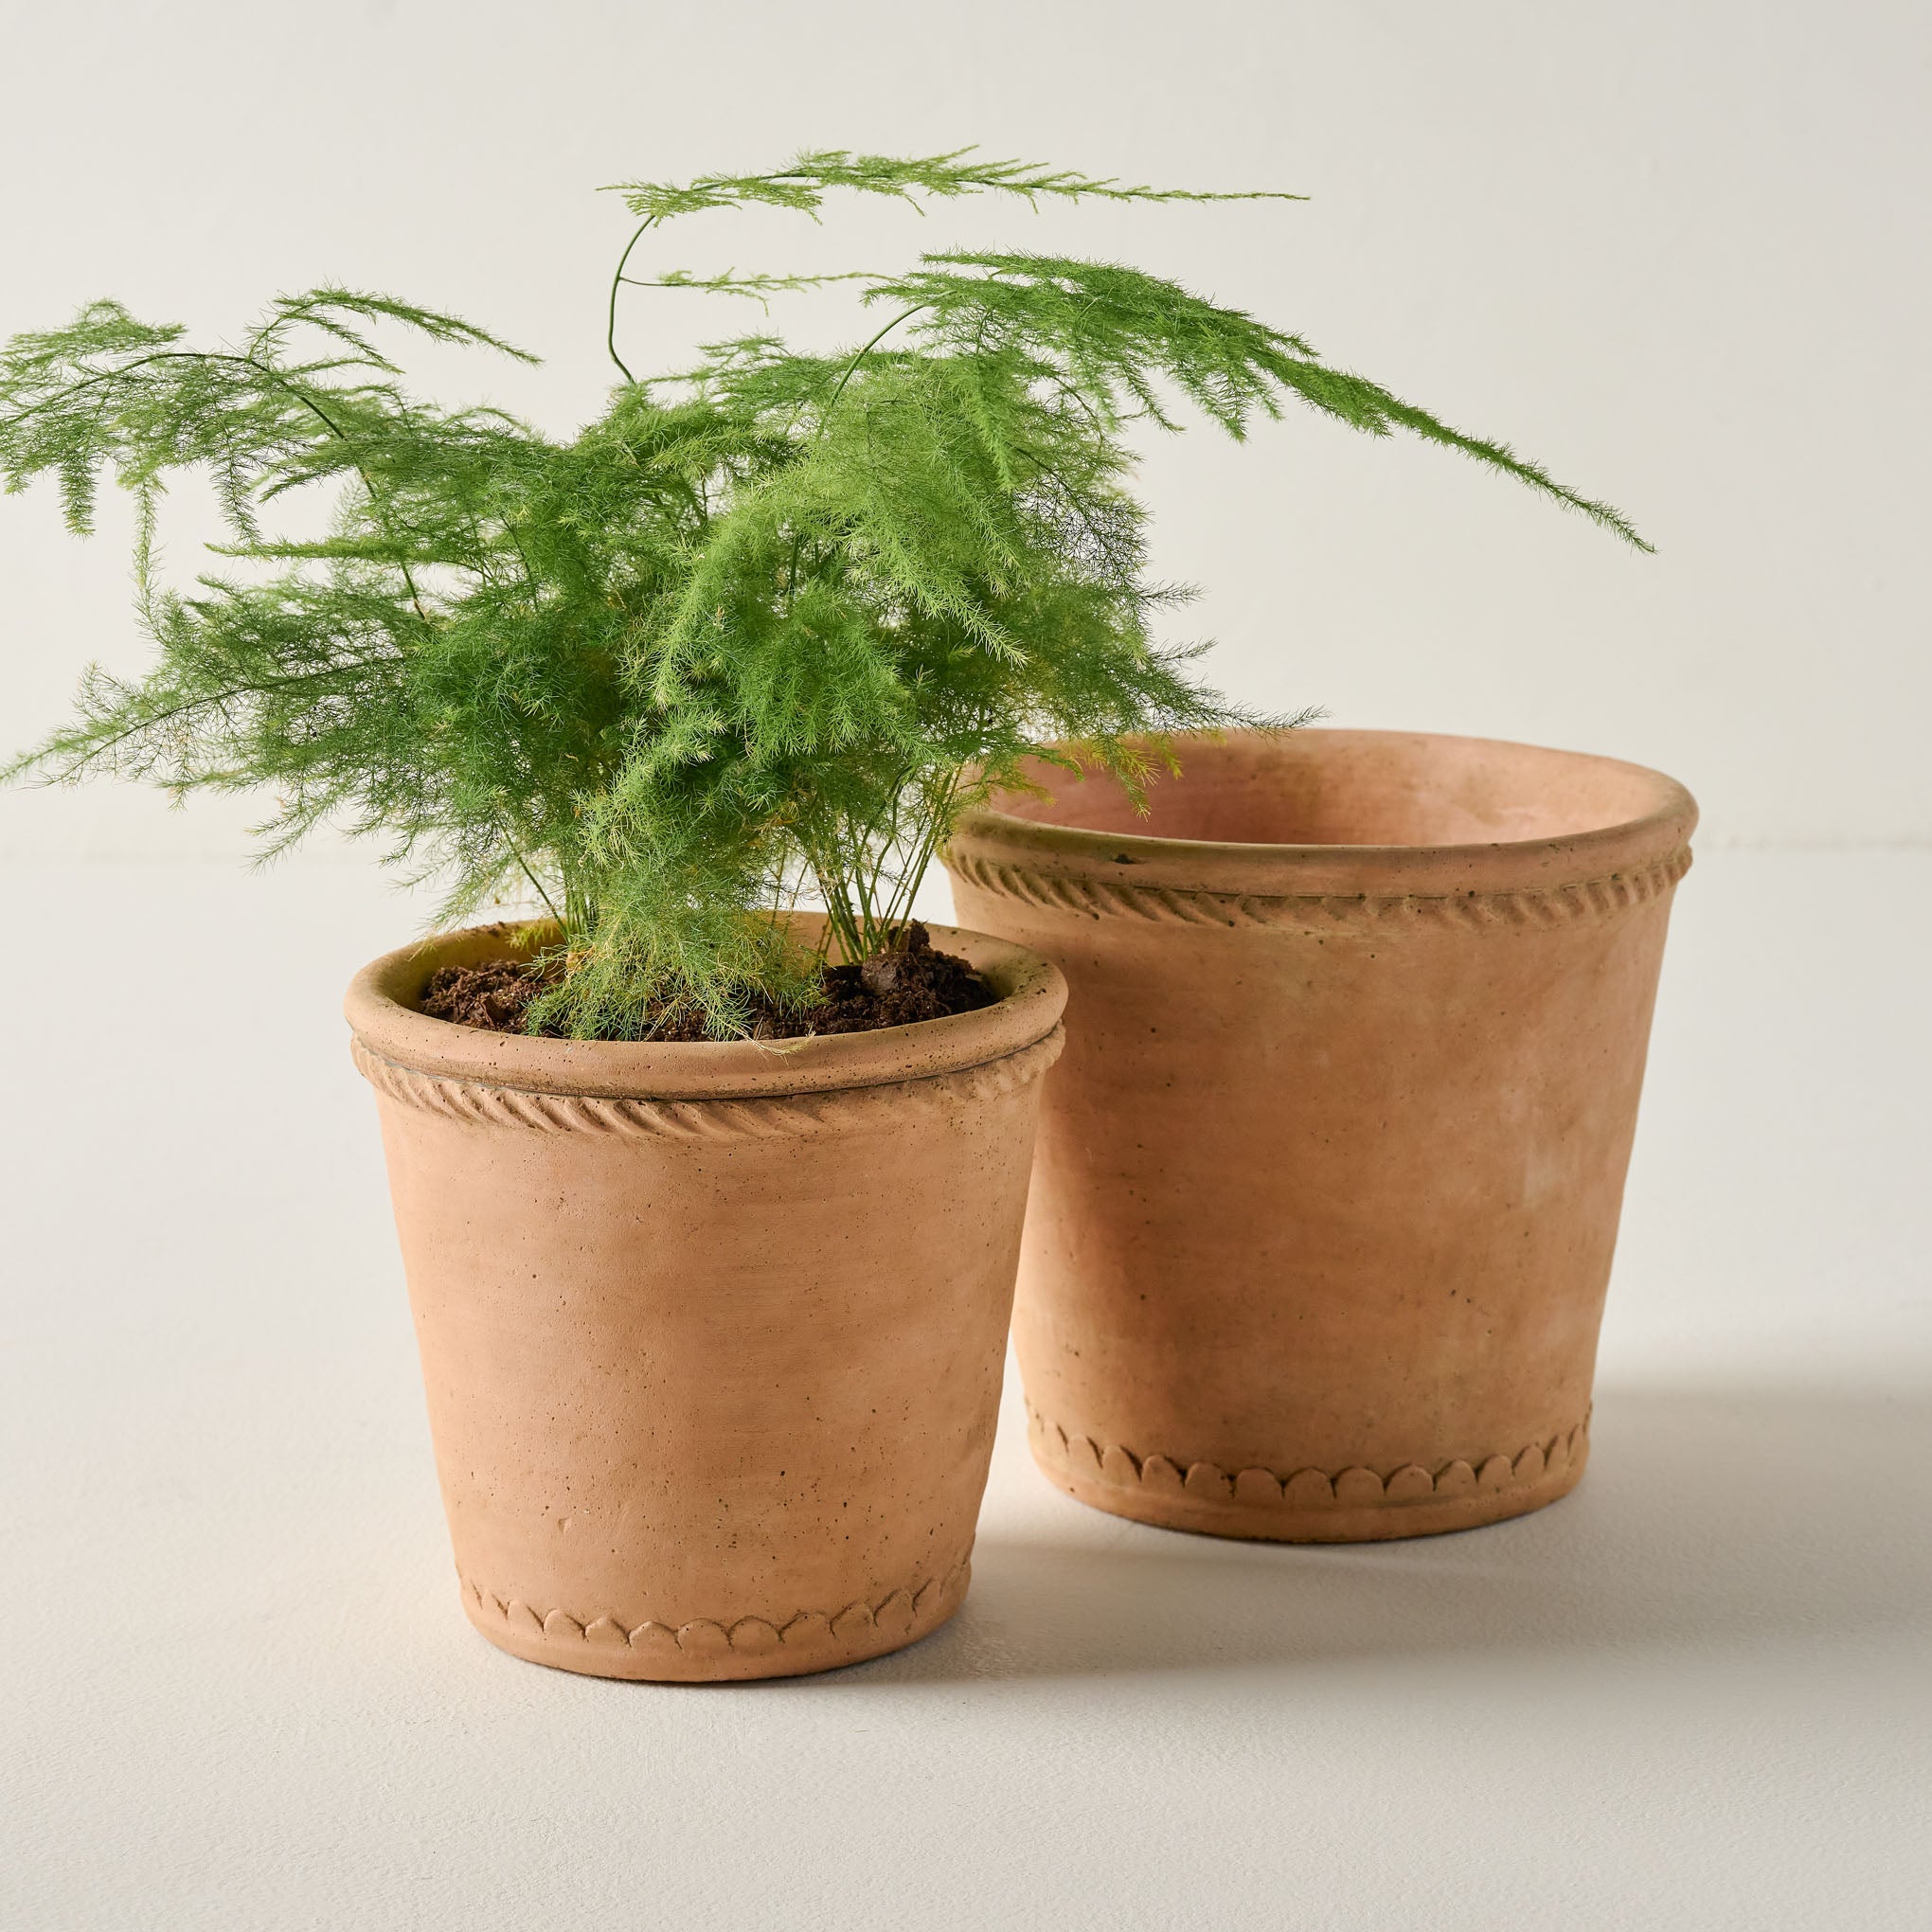 Terracotta Garden Roped Edge Pot with plant Items range from $18.00 to $28.00